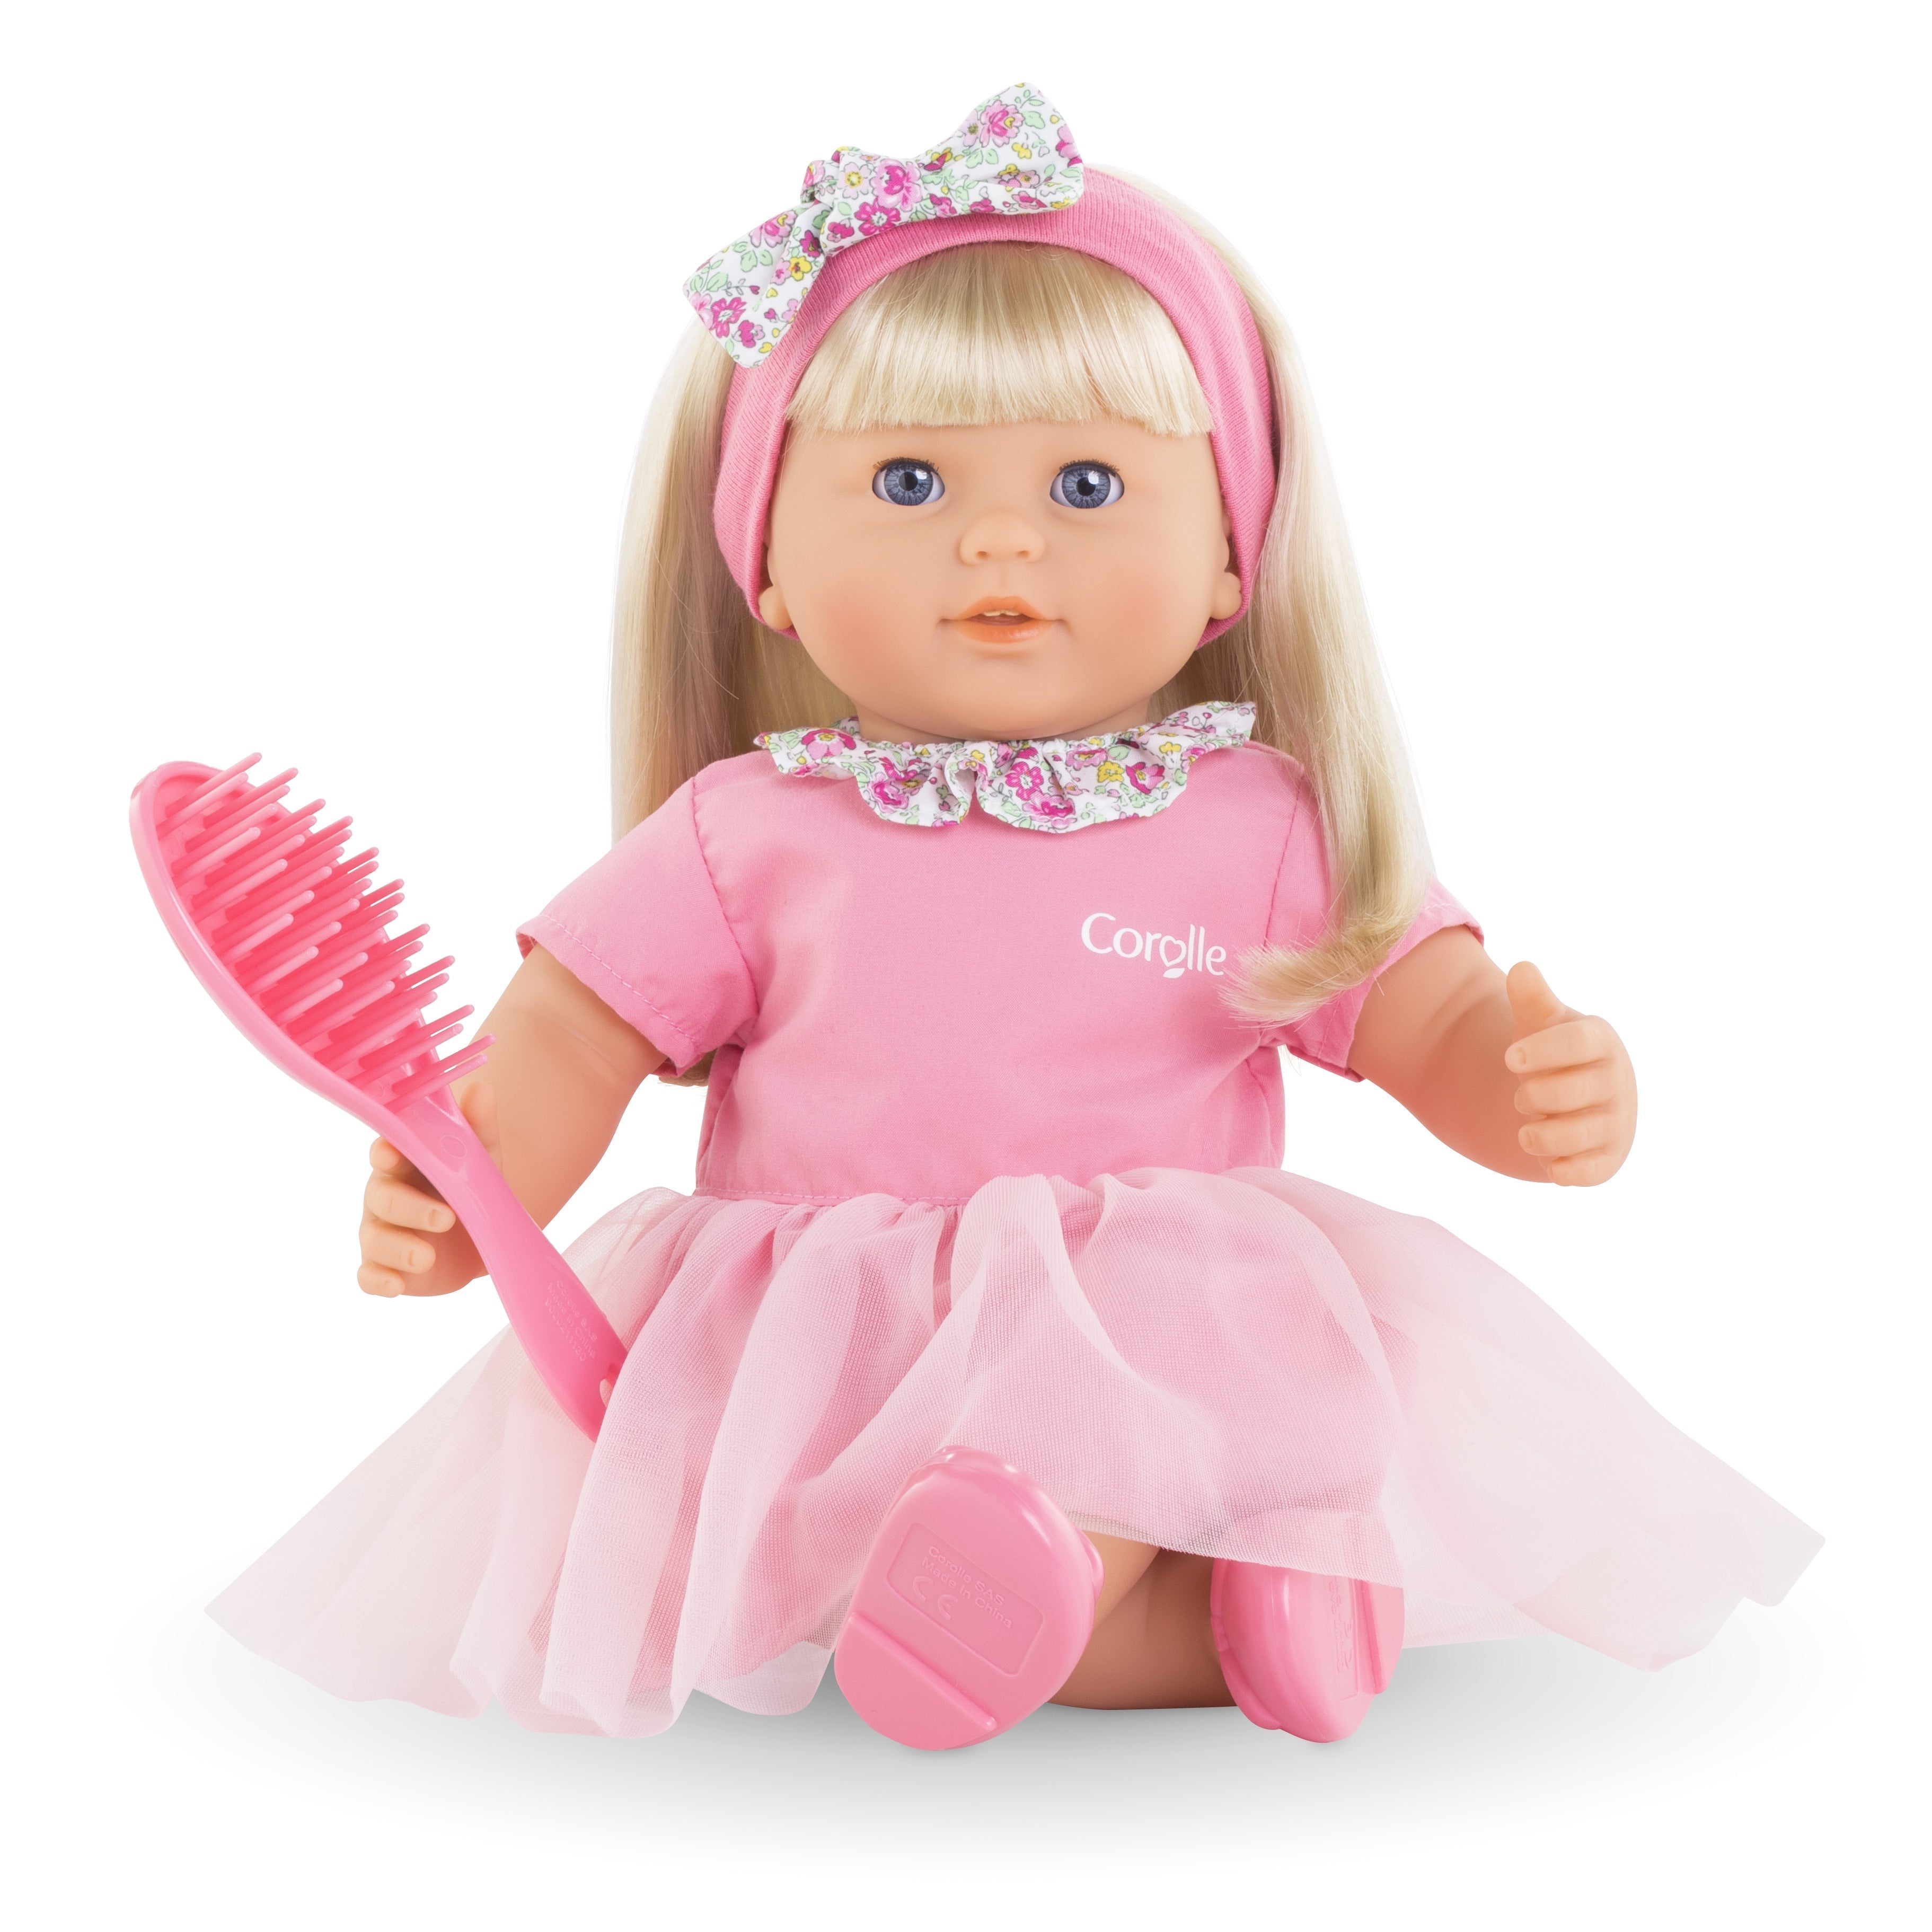 Adele 14" Long Blonde Haired Doll